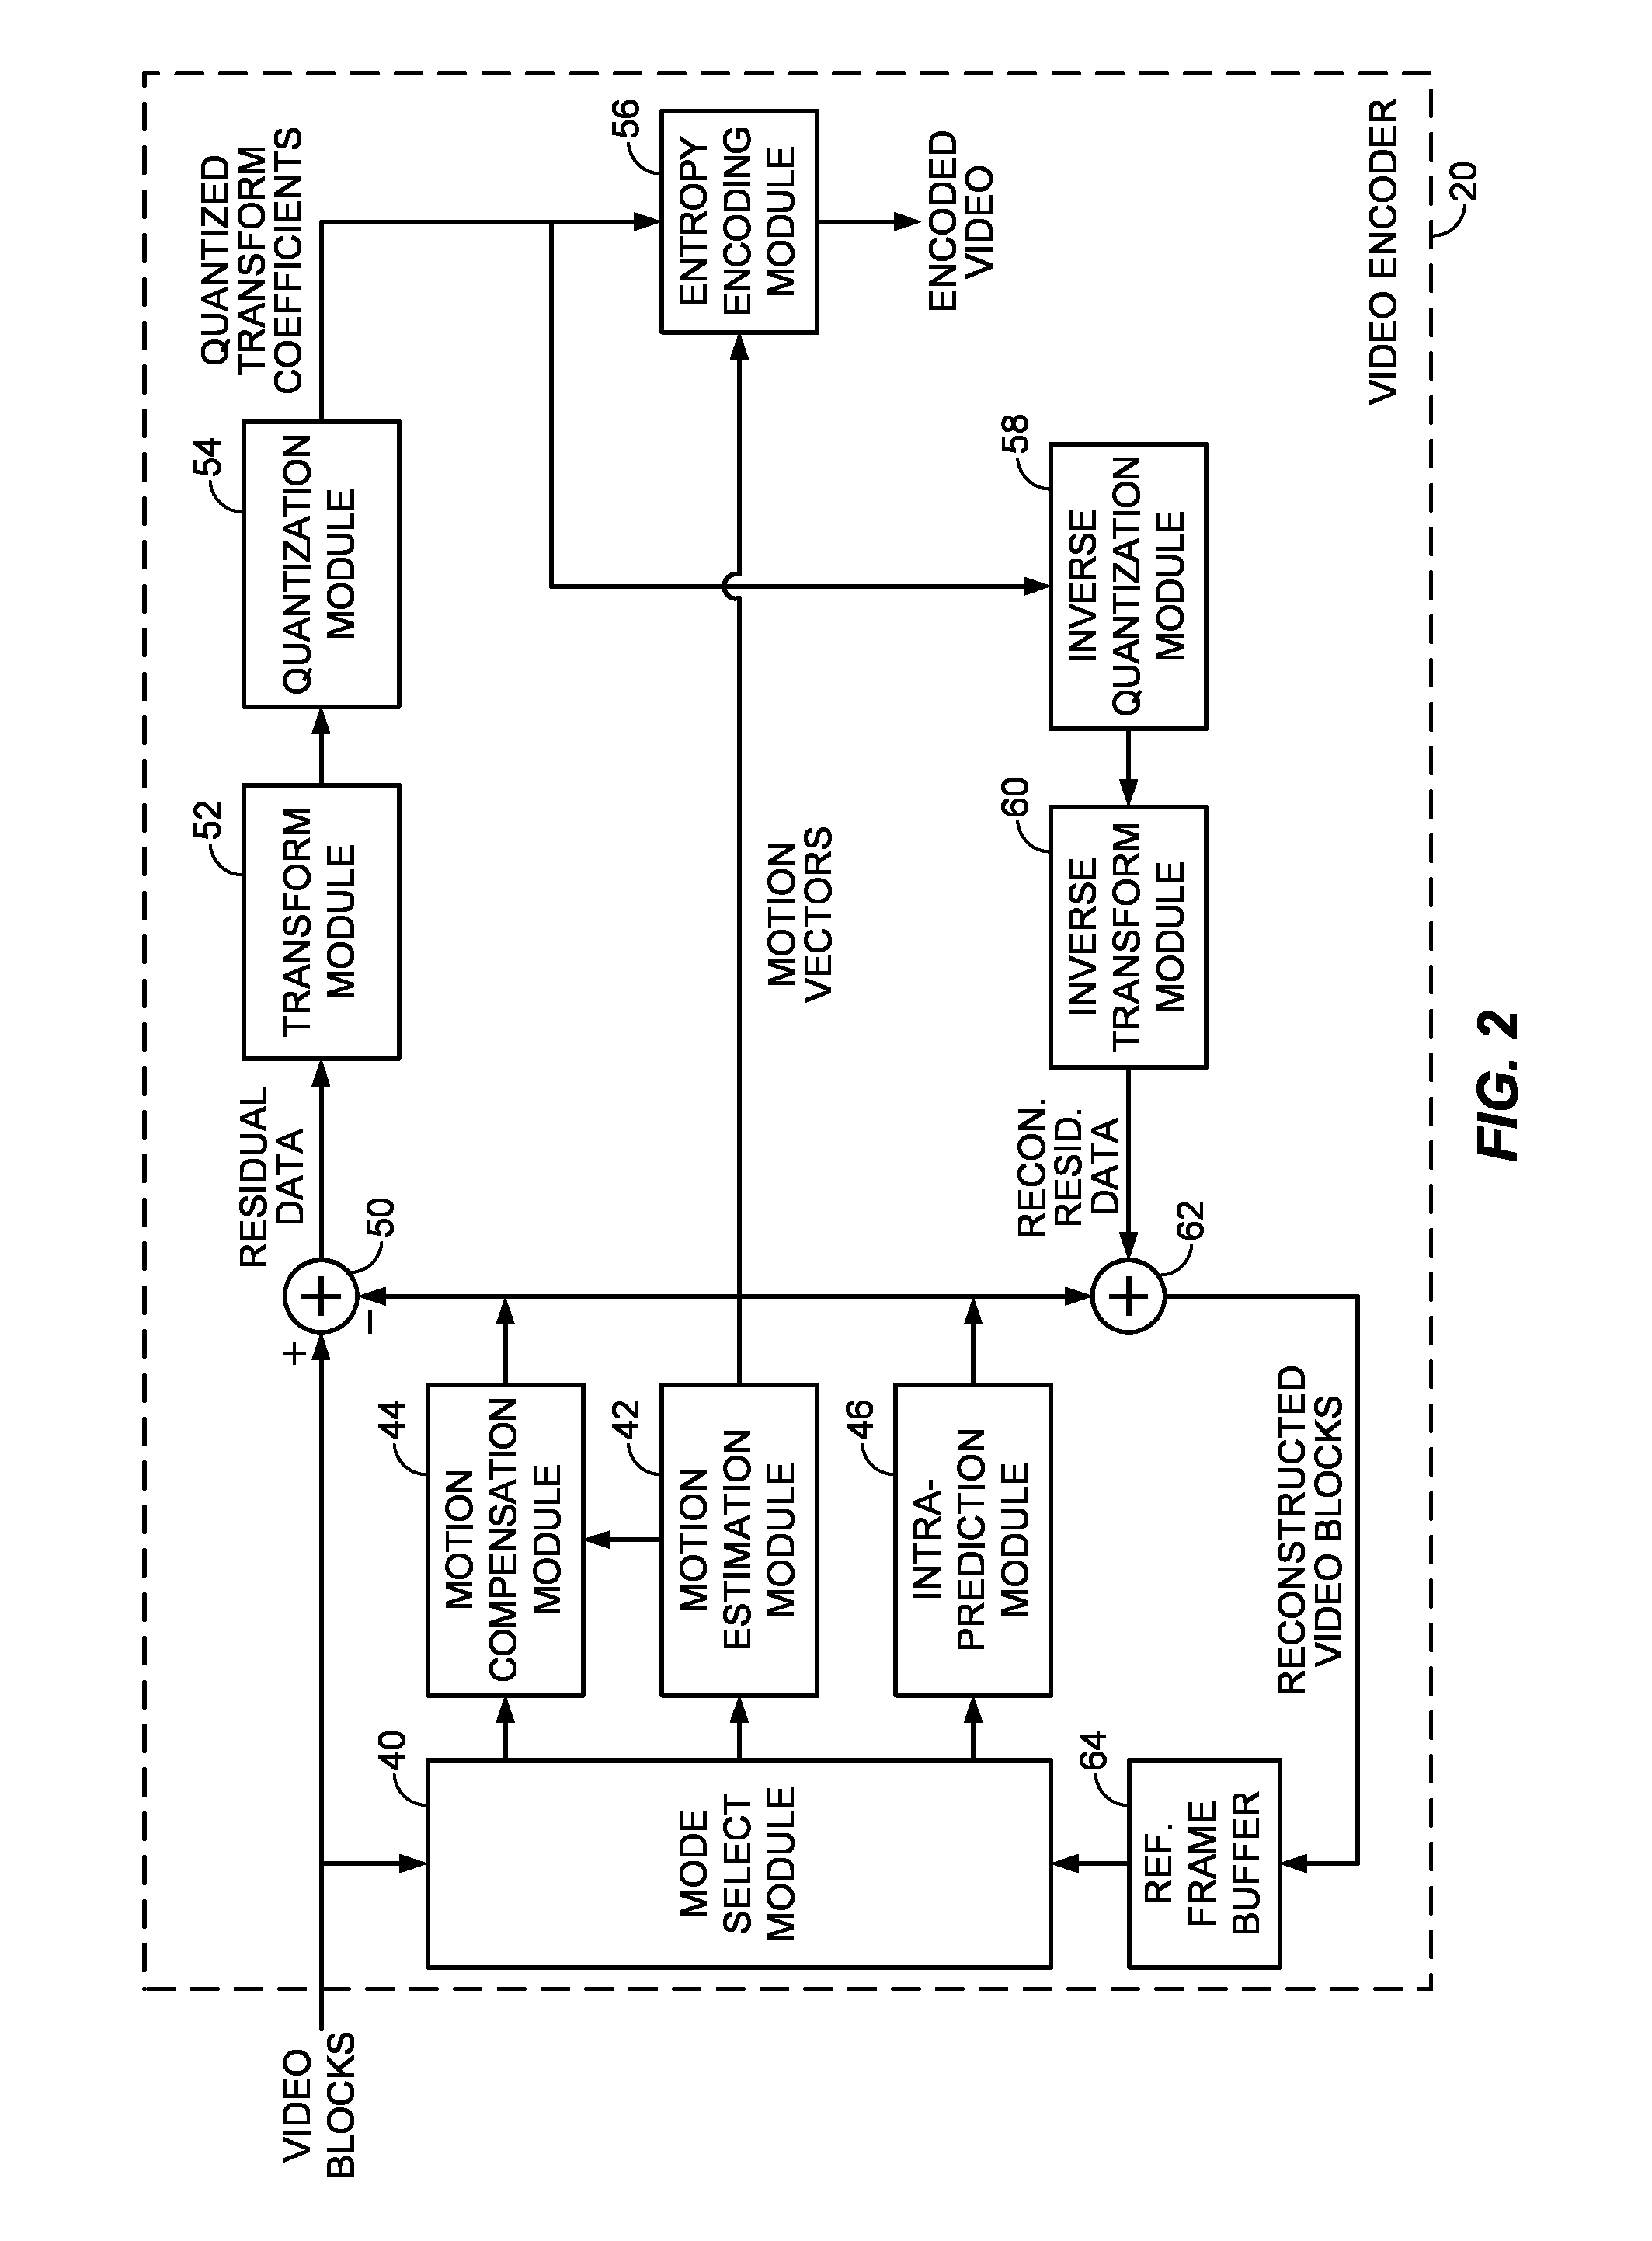 Pipelined intra-prediction hardware architecture for video coding